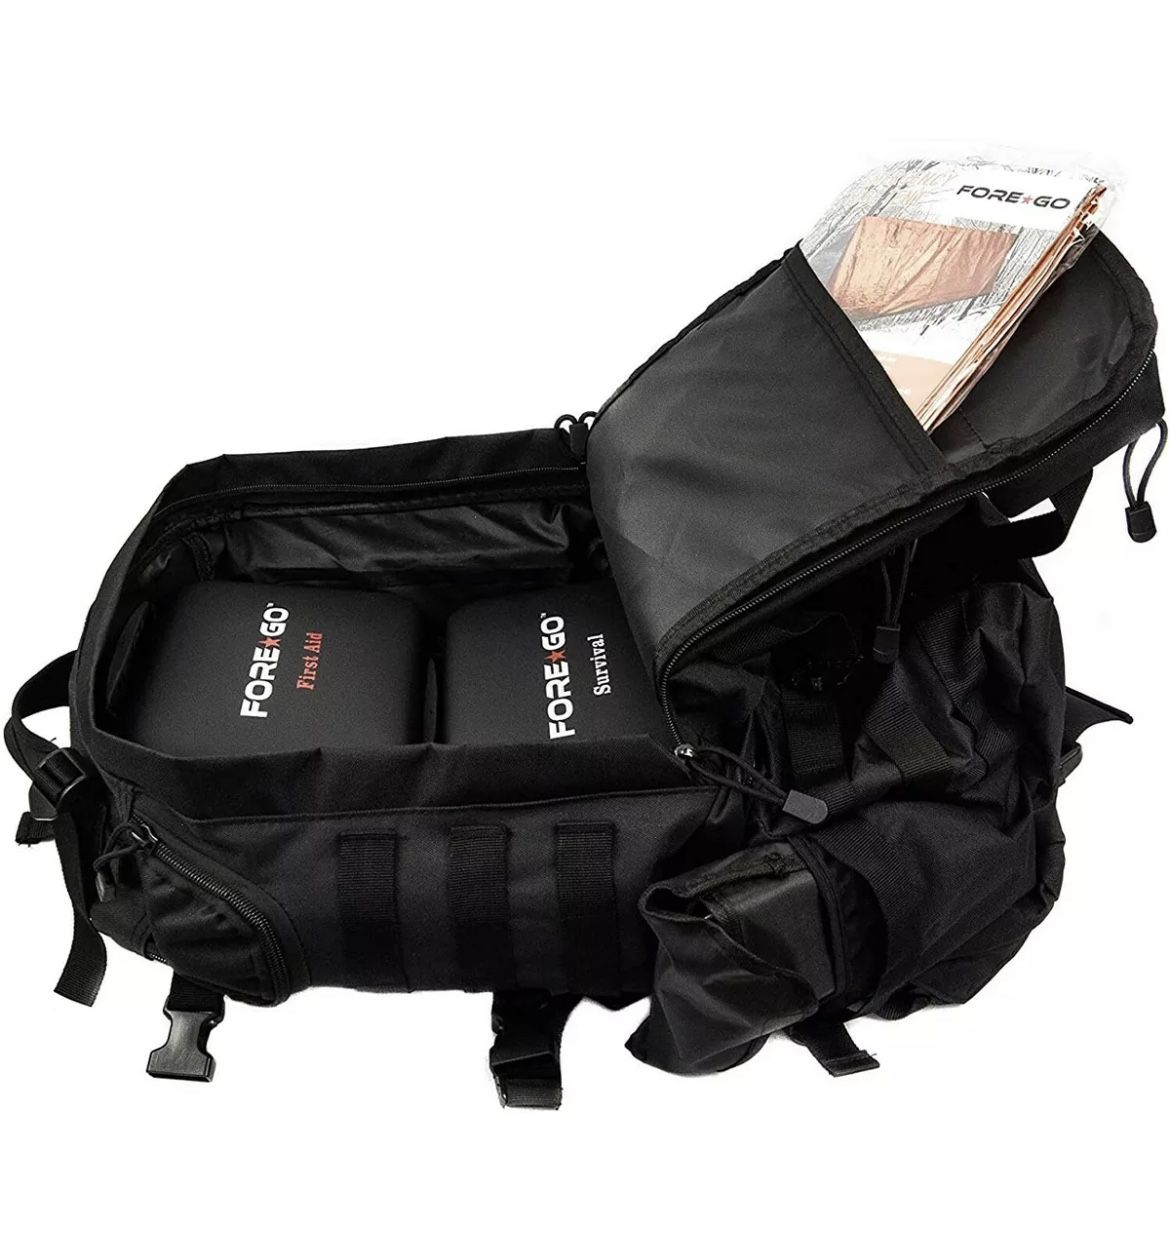 FOREGO - Survival Backpack Kit for camping, surviving, hiking and bugging out